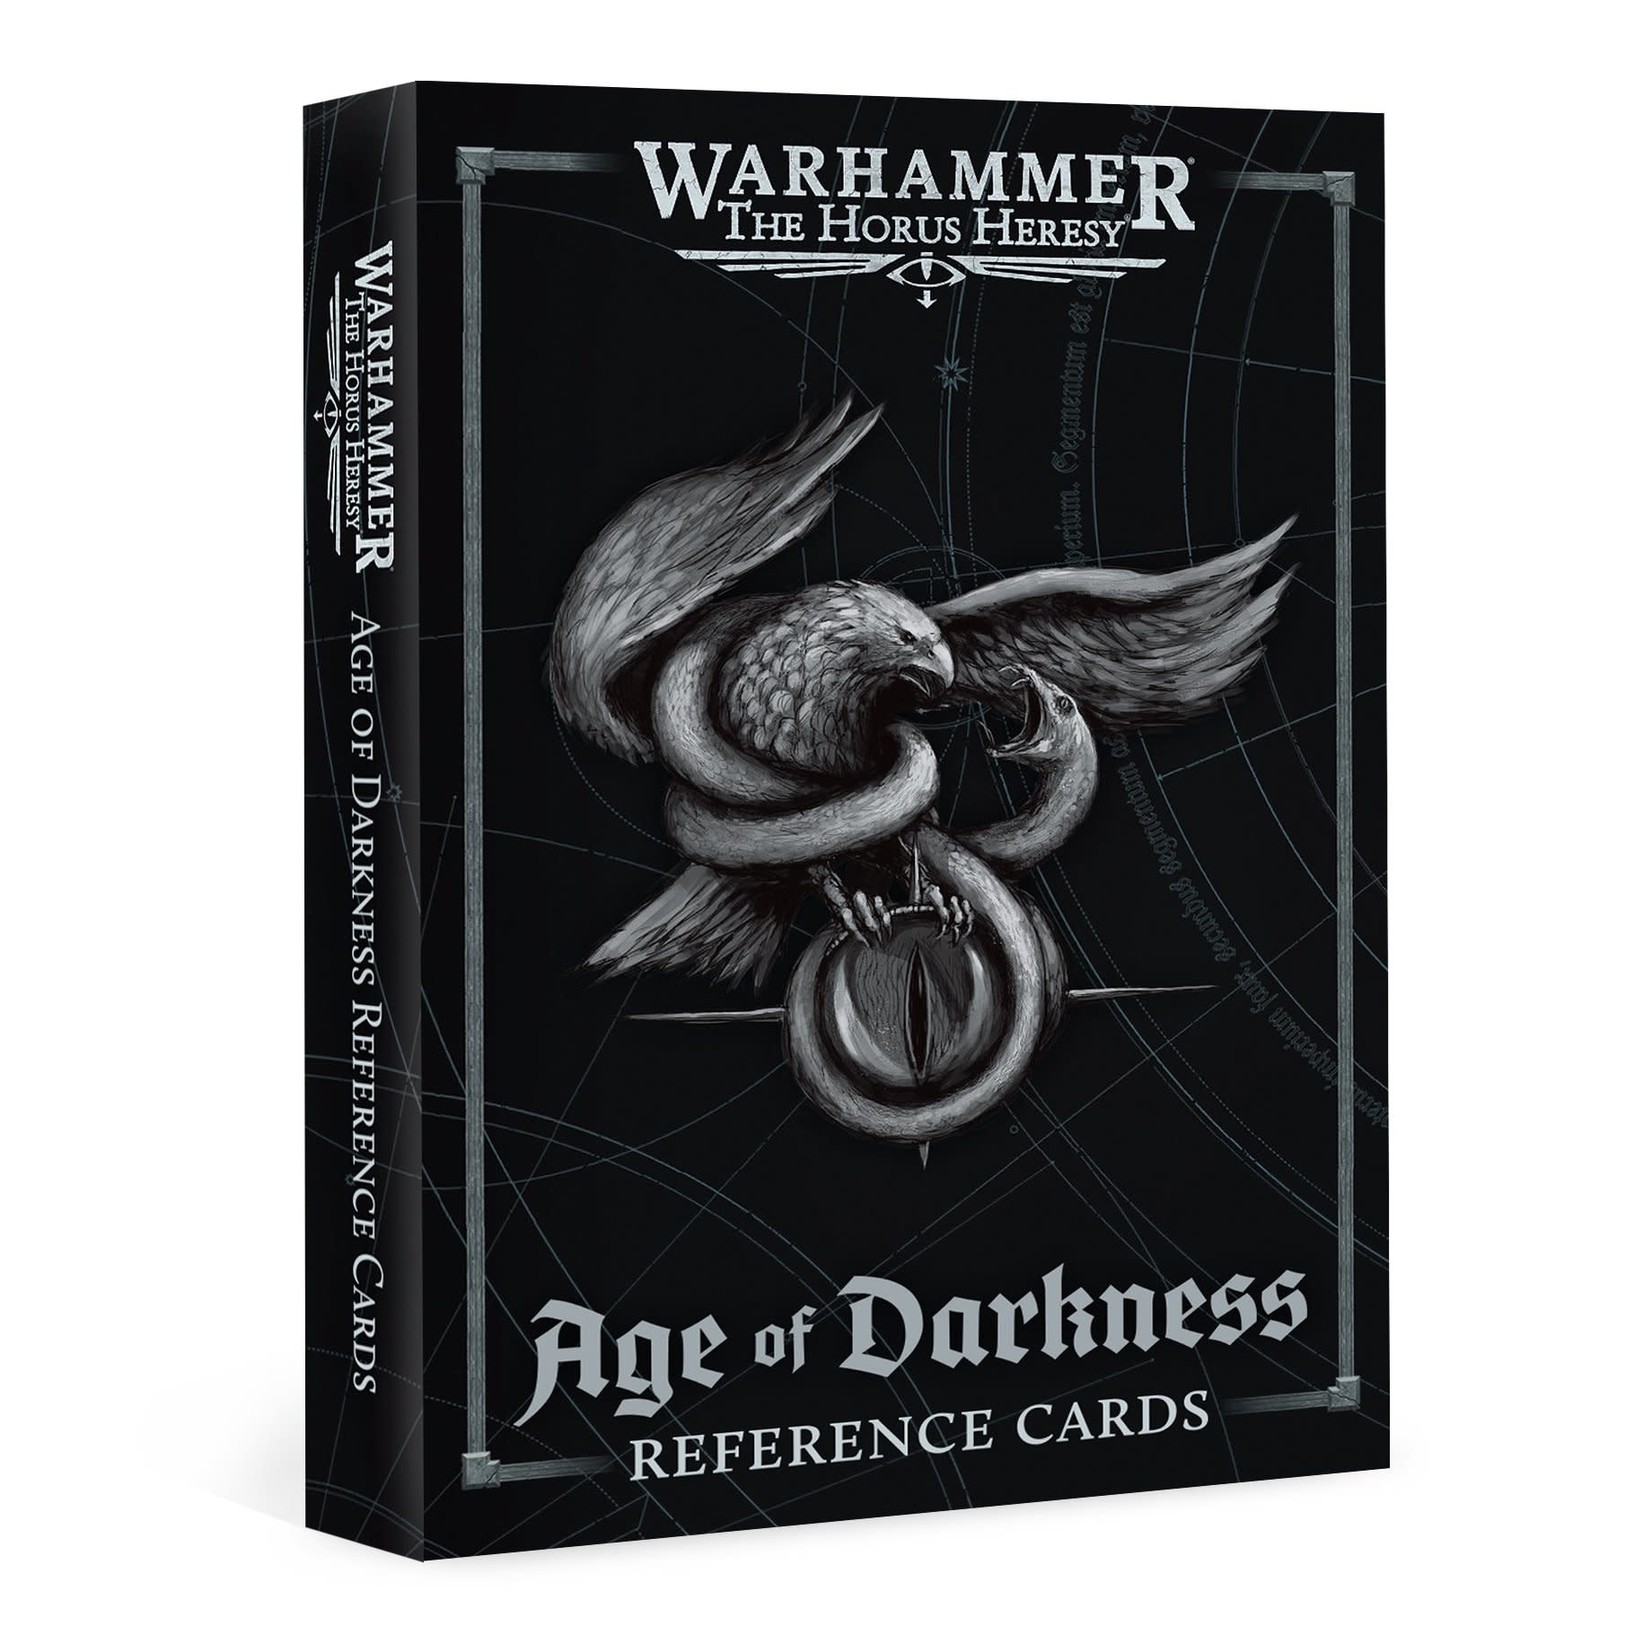 Games Workshop: Warhammer - The Horus Heresy - Age of Darkness